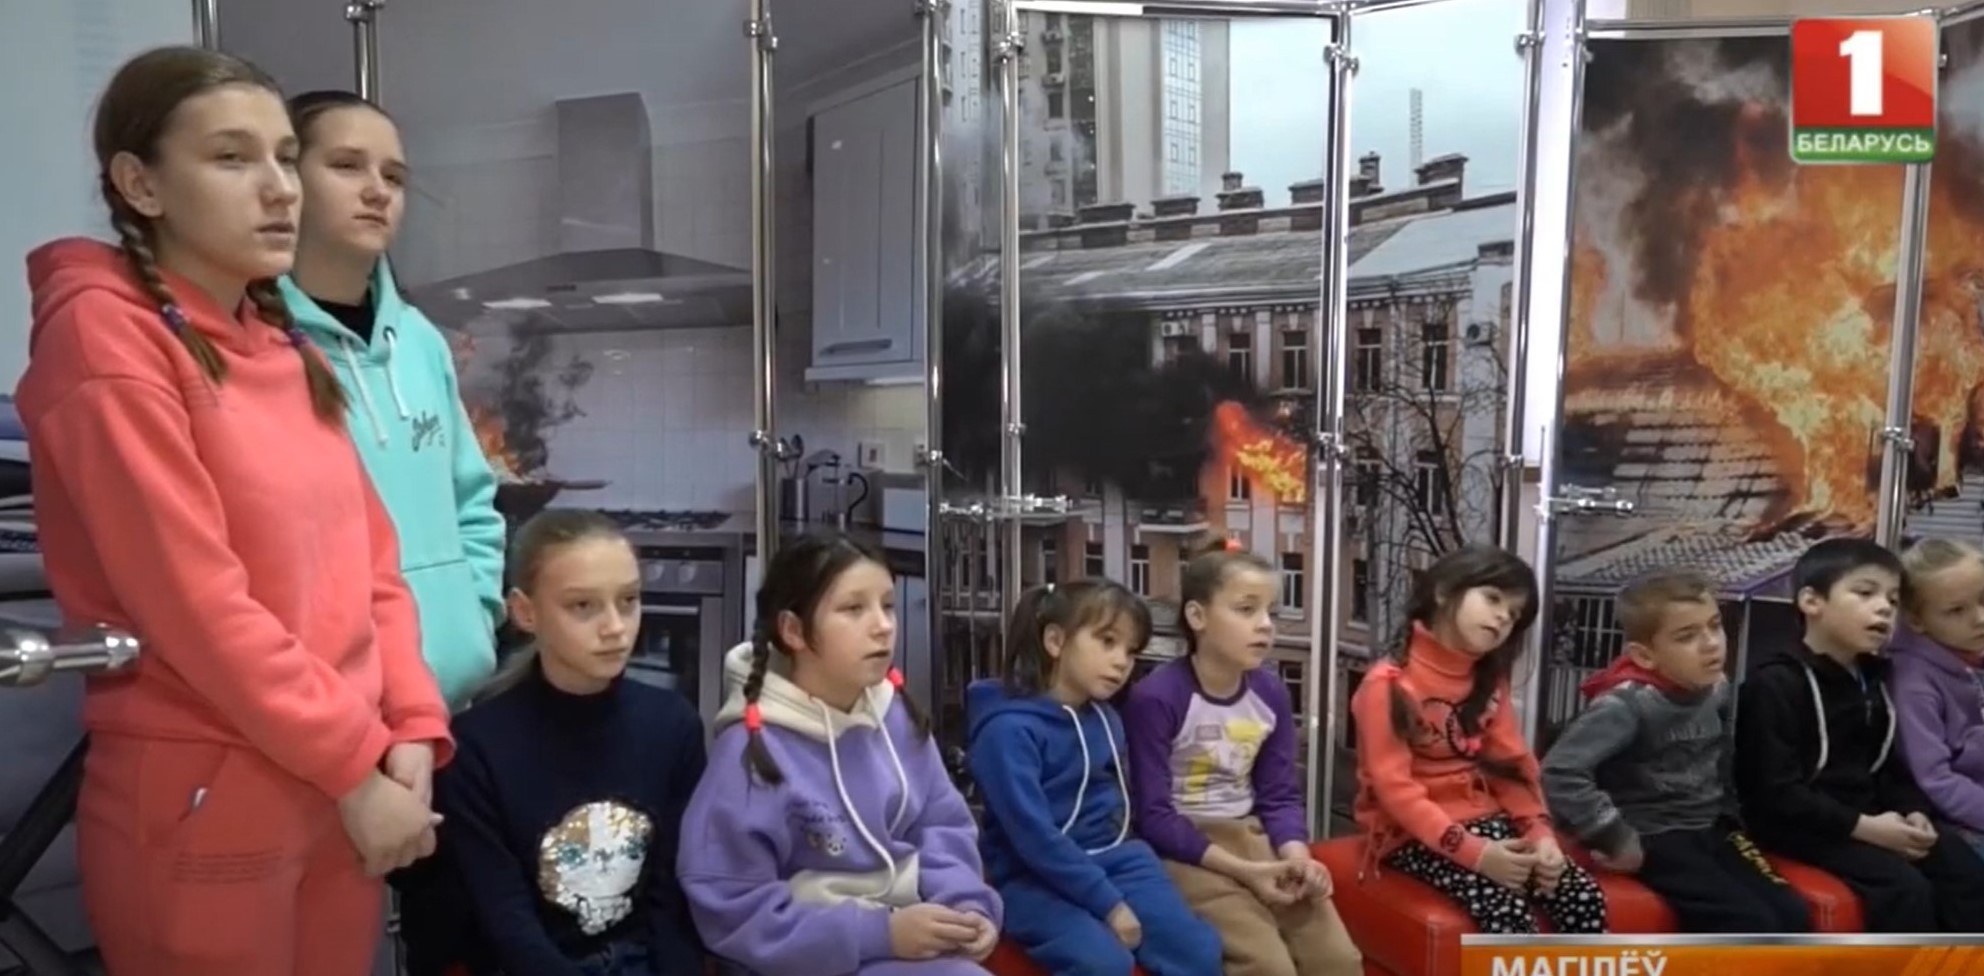 Children from Luhansk oblast in Mogilev Screenshot from the video